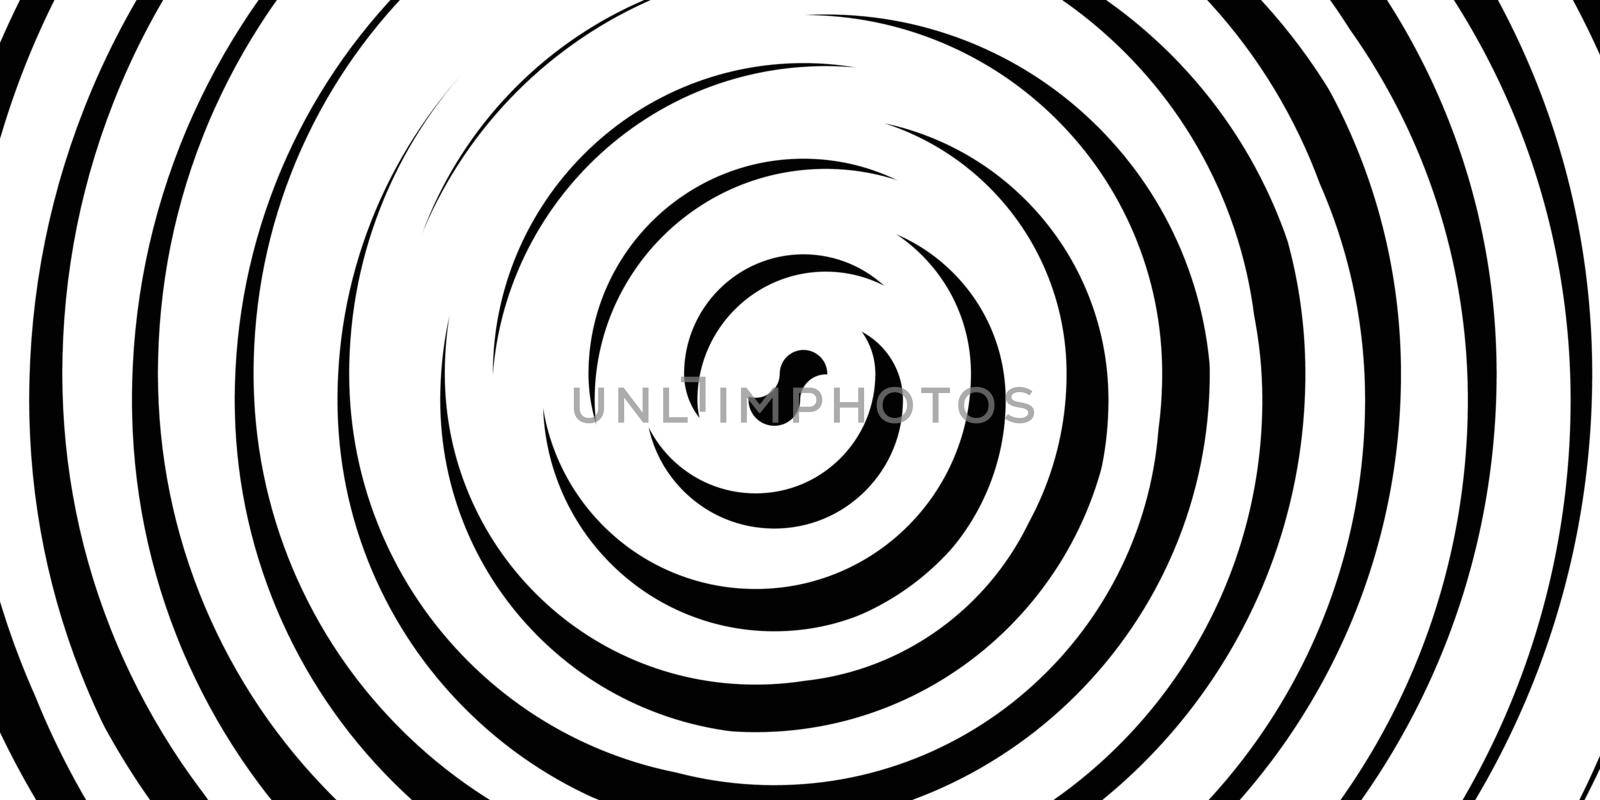 Swirl hypnotic black and white spiral. Monochrome abstract background. Vector flat geometric illustration.Template design for banner, website, template, leaflet, brochure, poster by allaku